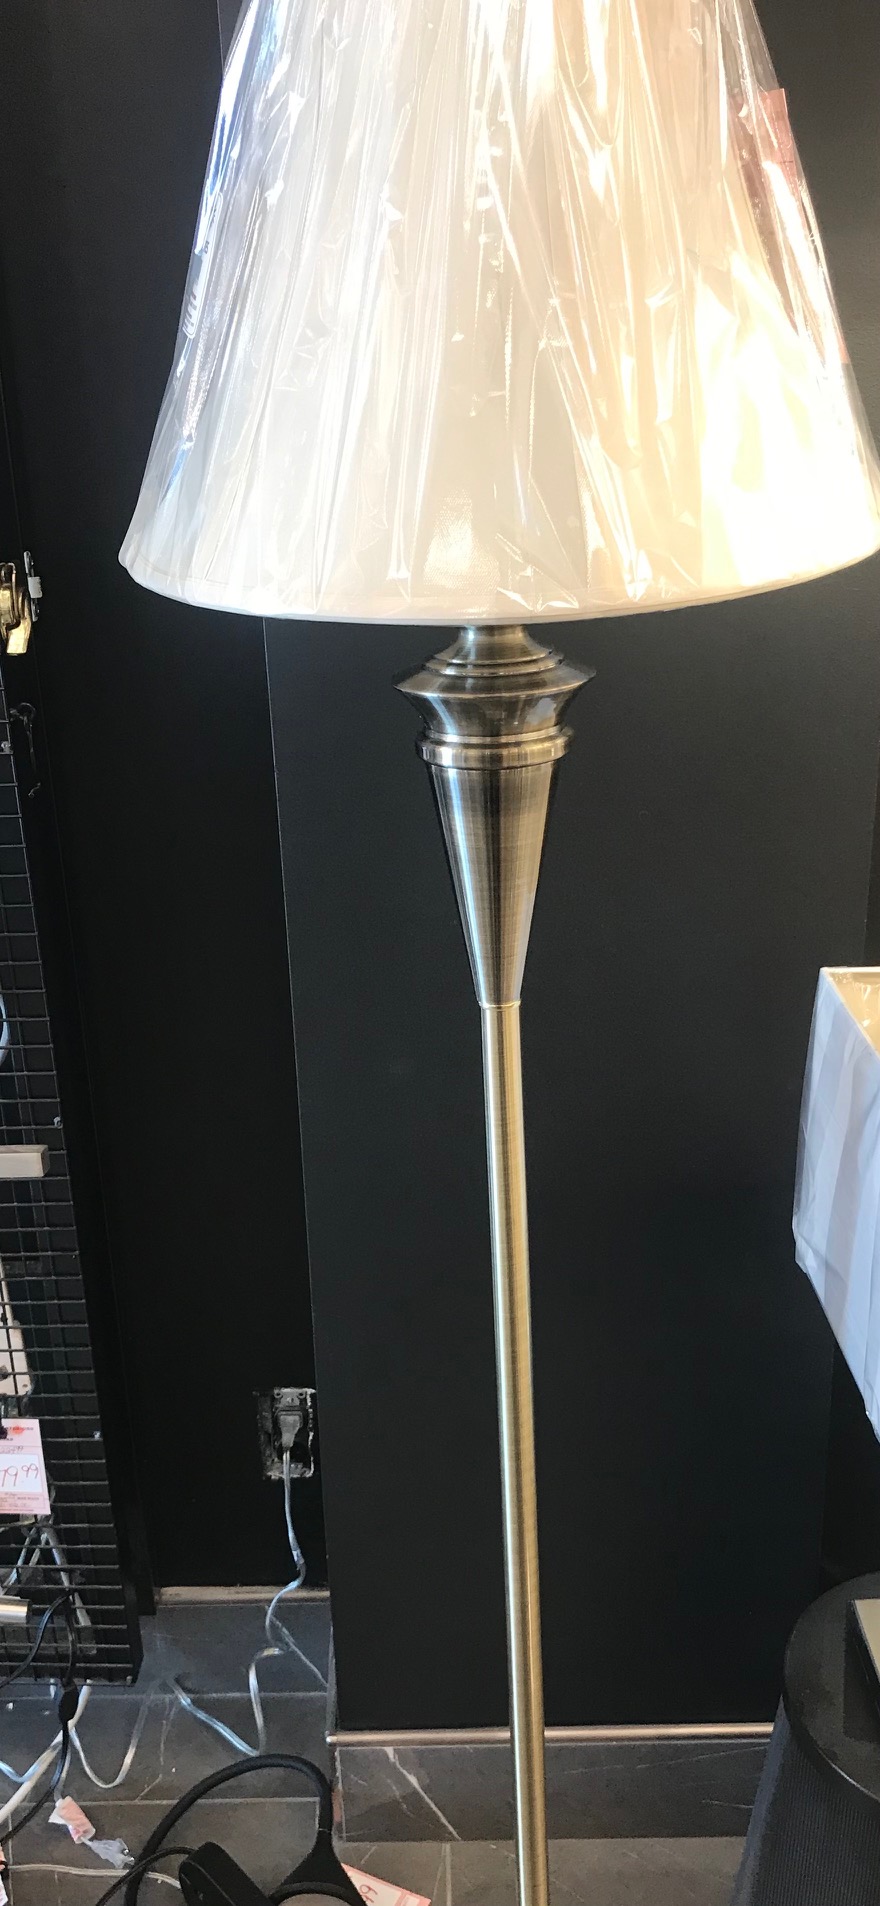 40180 Floor Lamp
Made in Canada
Available in Antique Brass
or Brushed Chrome
Regular Price $279.99
Sale Price 195.99